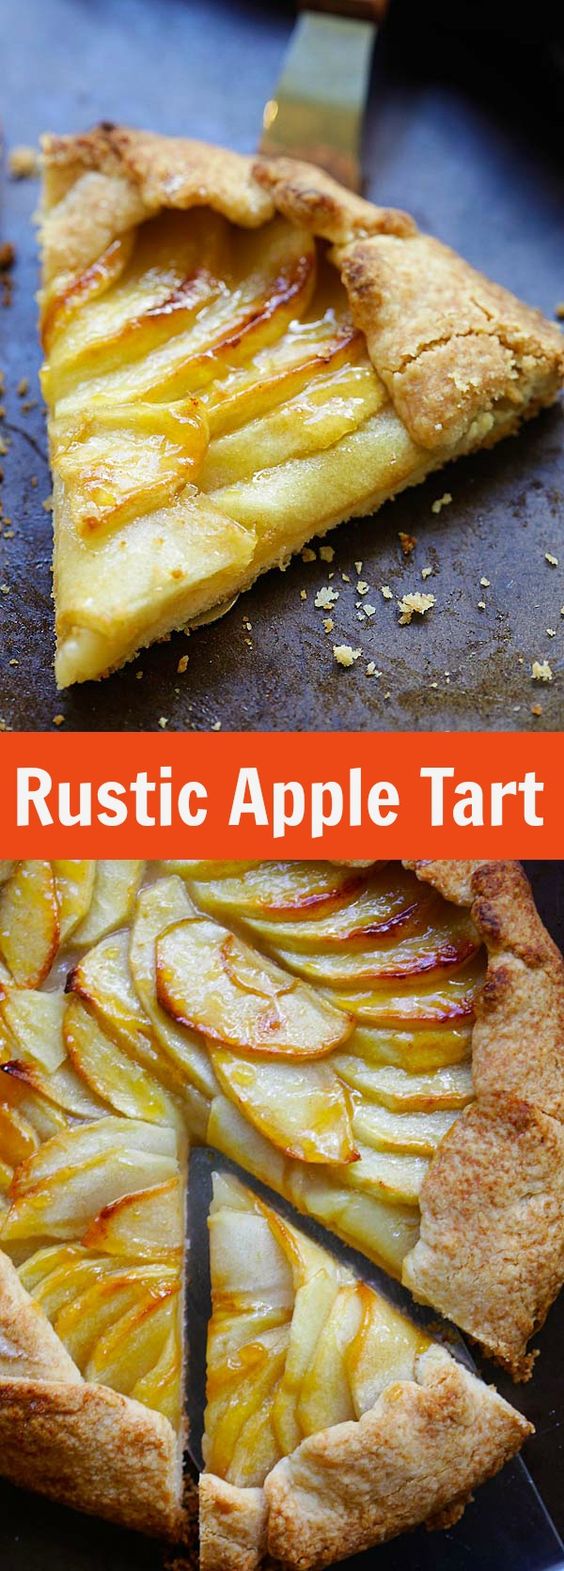 Apple tart is an impressive fruit dessert with a rustic look. With buttery, flaky crust and sweet apple filling, this dessert recipe will become a favorite! | rasamalaysia.com